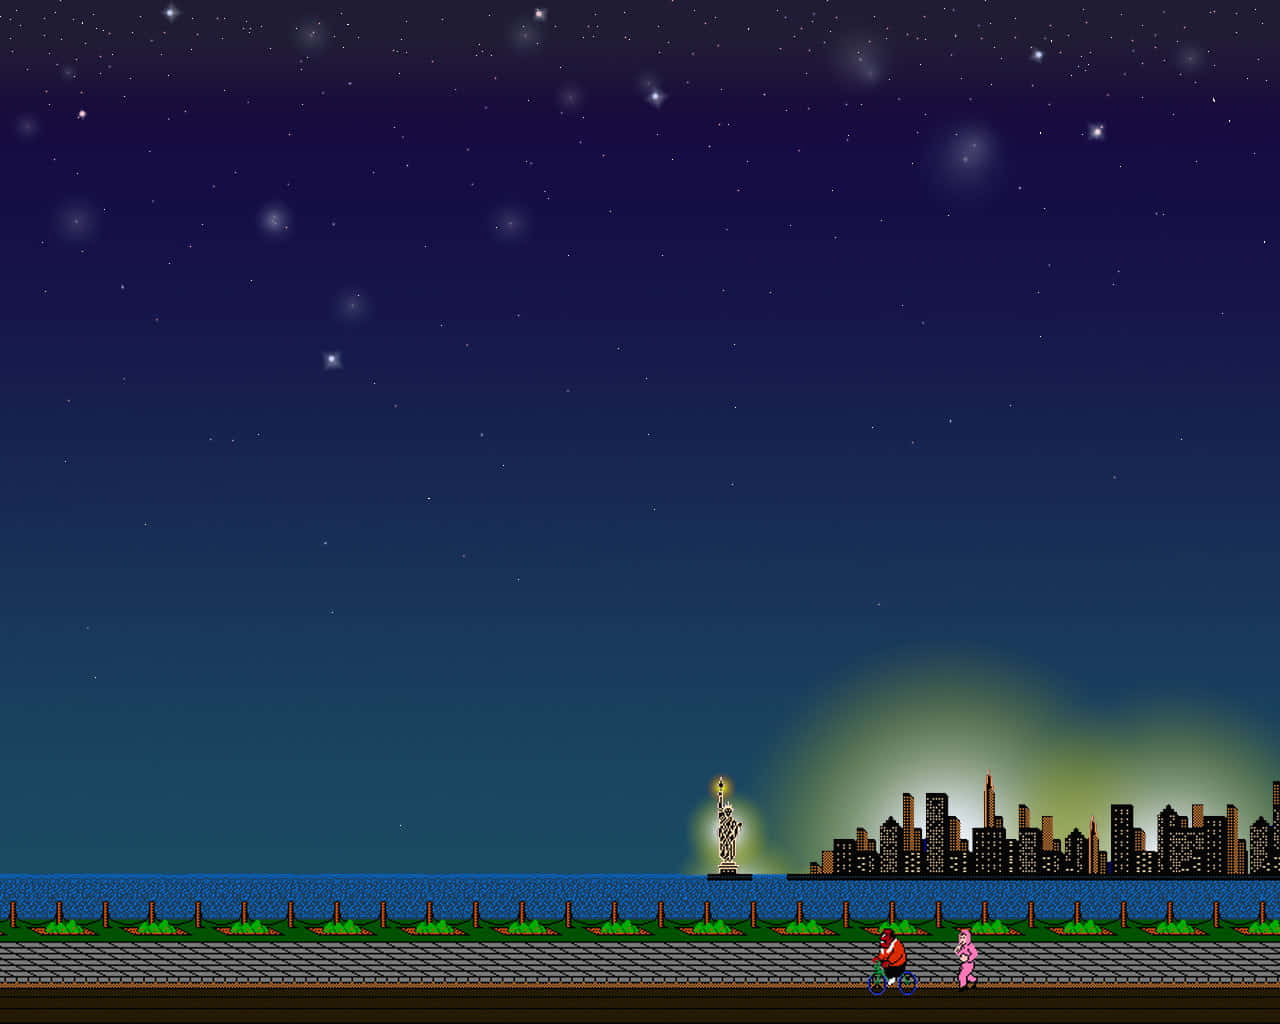 Retro Game Punch-out Night Sky Wallpaper